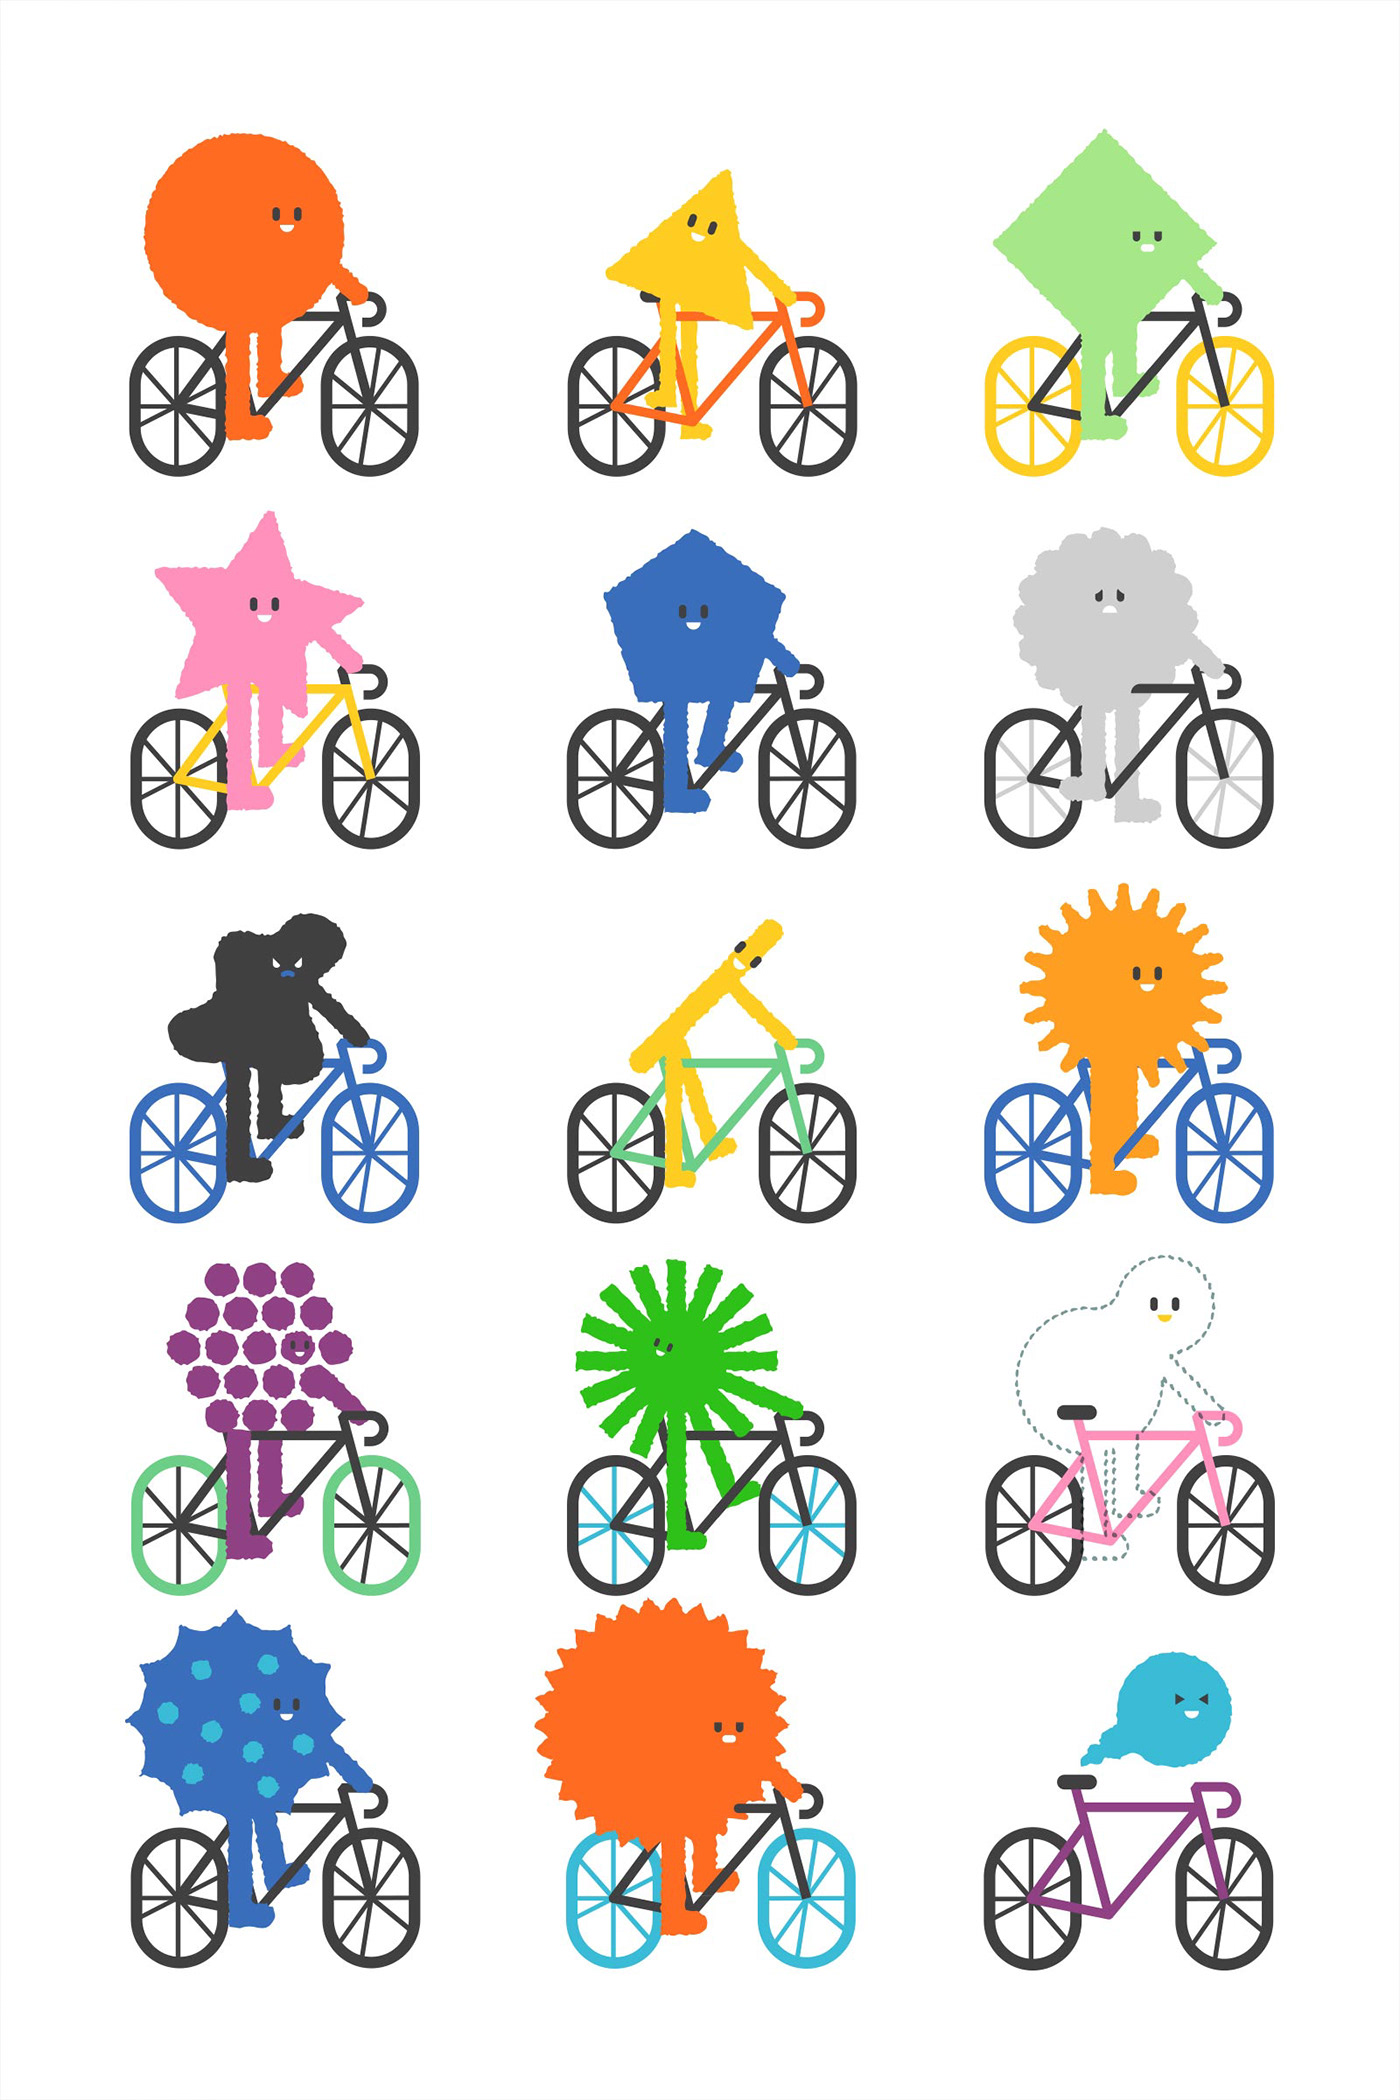 Character Cycling friends book poster Bicycle shapes kids